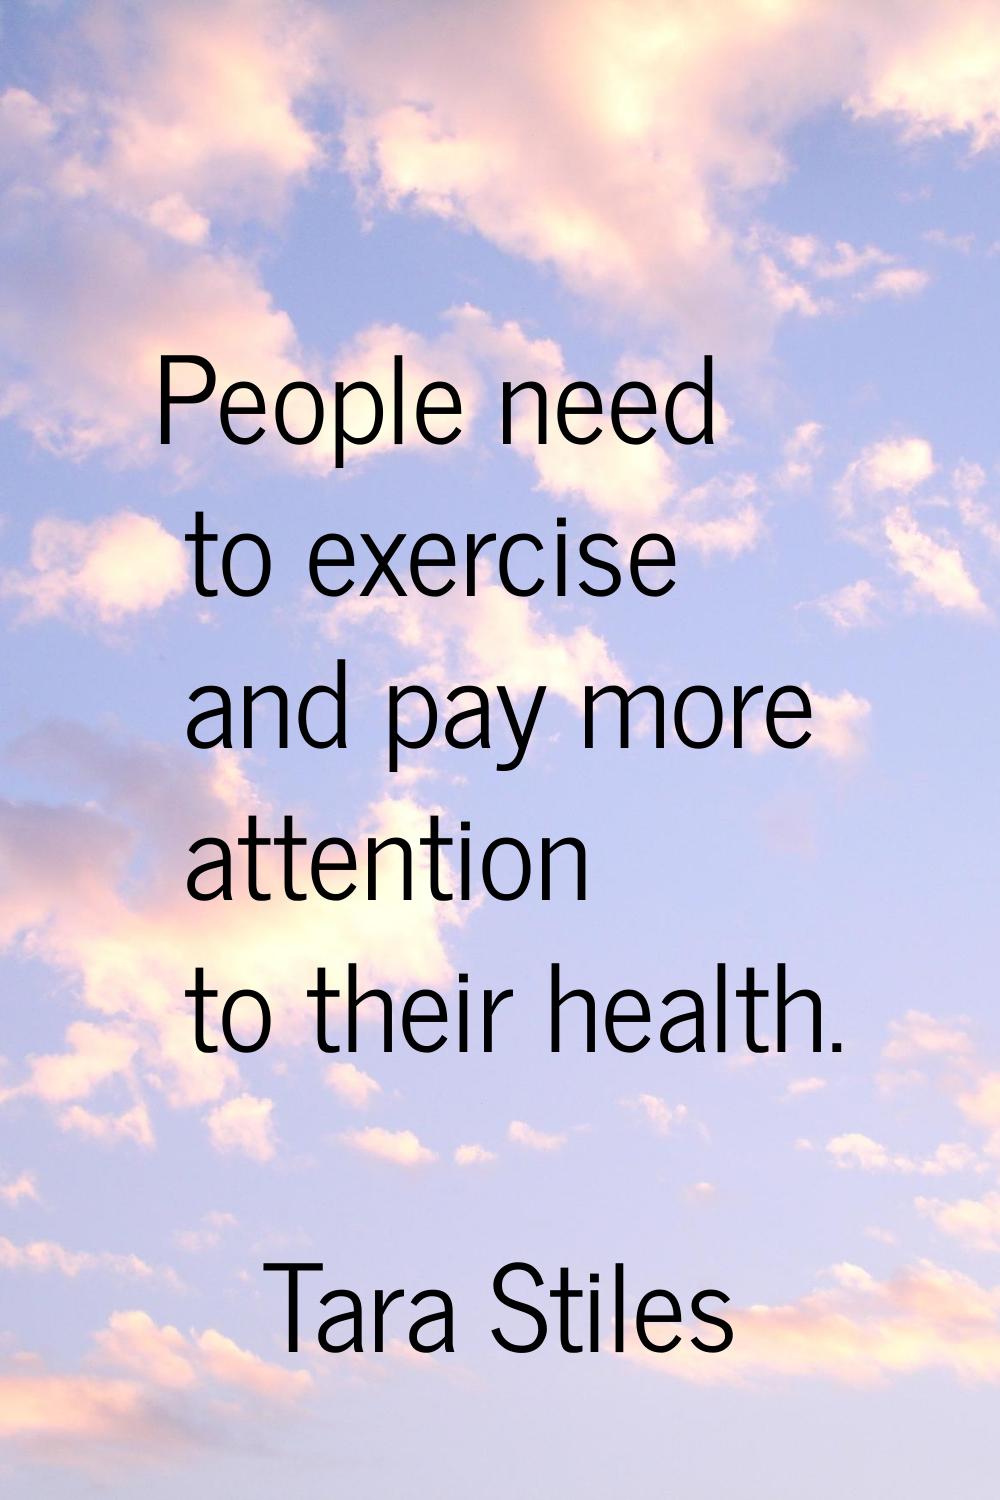 People need to exercise and pay more attention to their health.